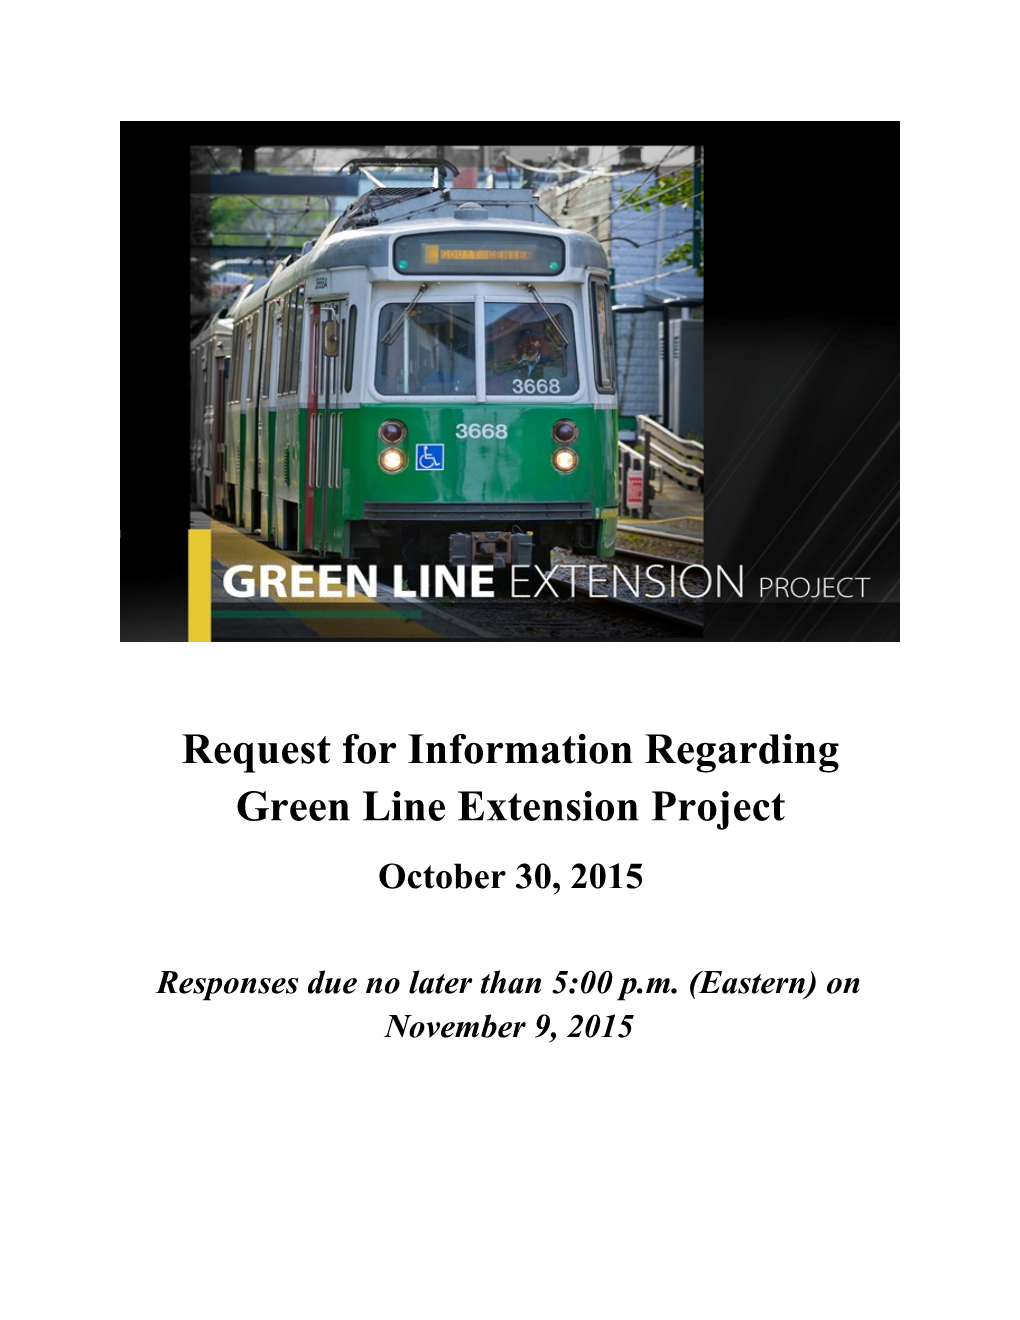 Request for Information Regarding Green Line Extension Project